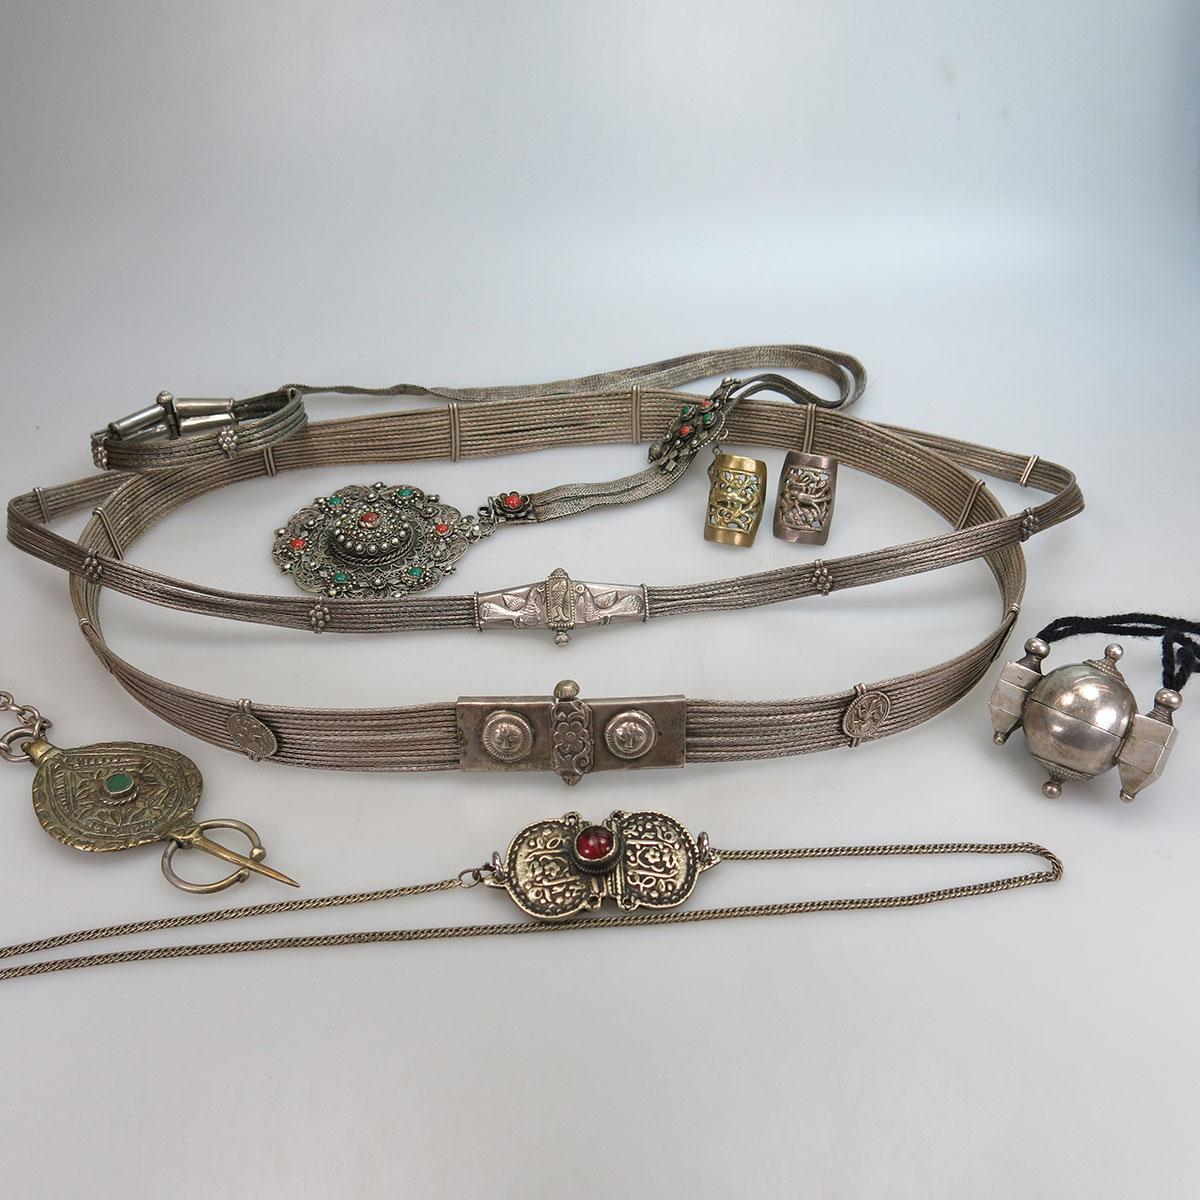 Quantity Of Eastern Silver And Silver-Plated Necklaces, Belts, Etc 